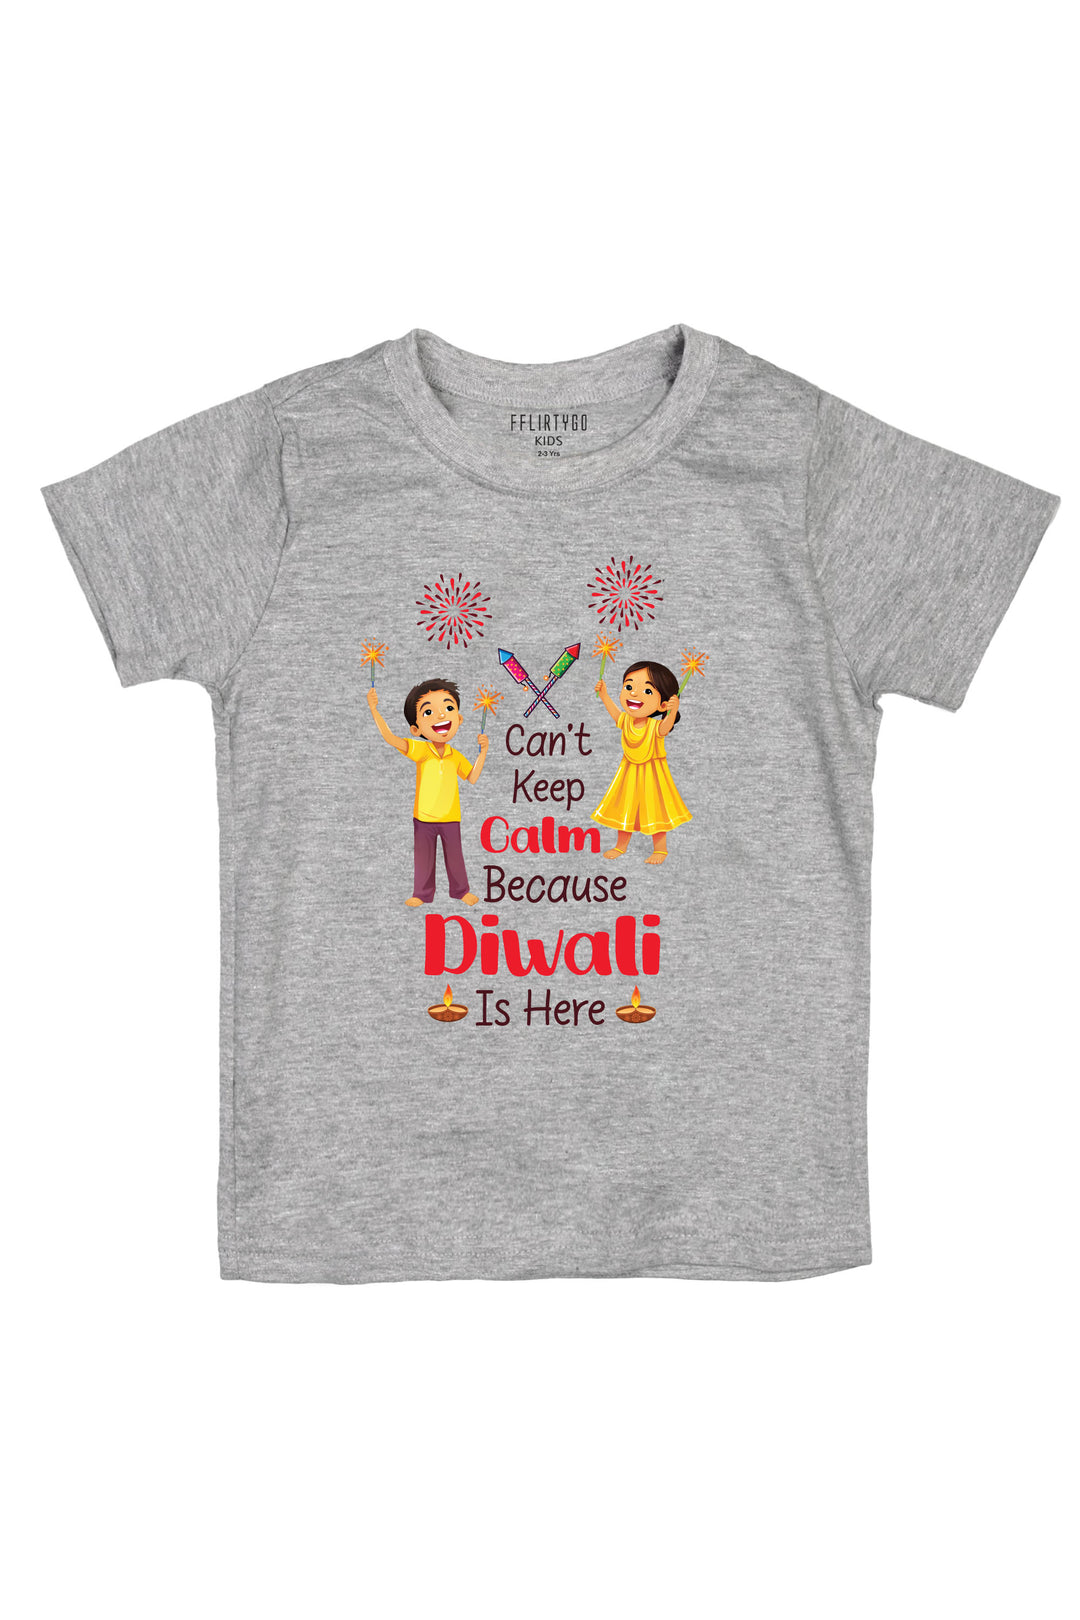 Can't Keep Calm Because Diwali Is Here Kids T Shirt